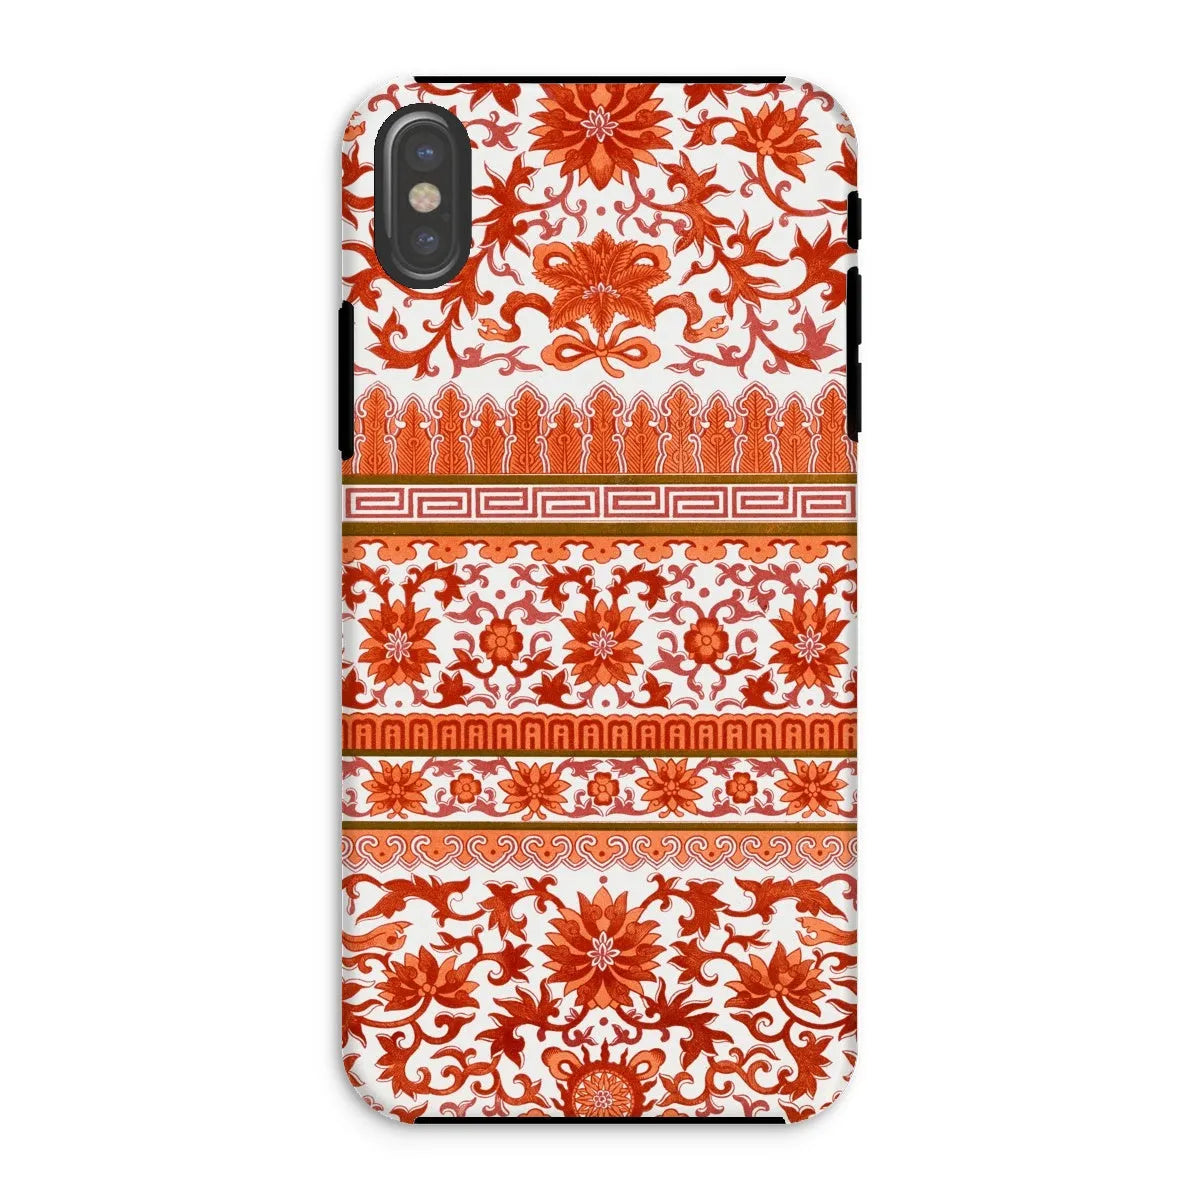 Fiery Chinese Floral Aesthetic Art Phone Case - Owen Jones - Iphone Xs / Matte - Mobile Phone Cases - Aesthetic Art